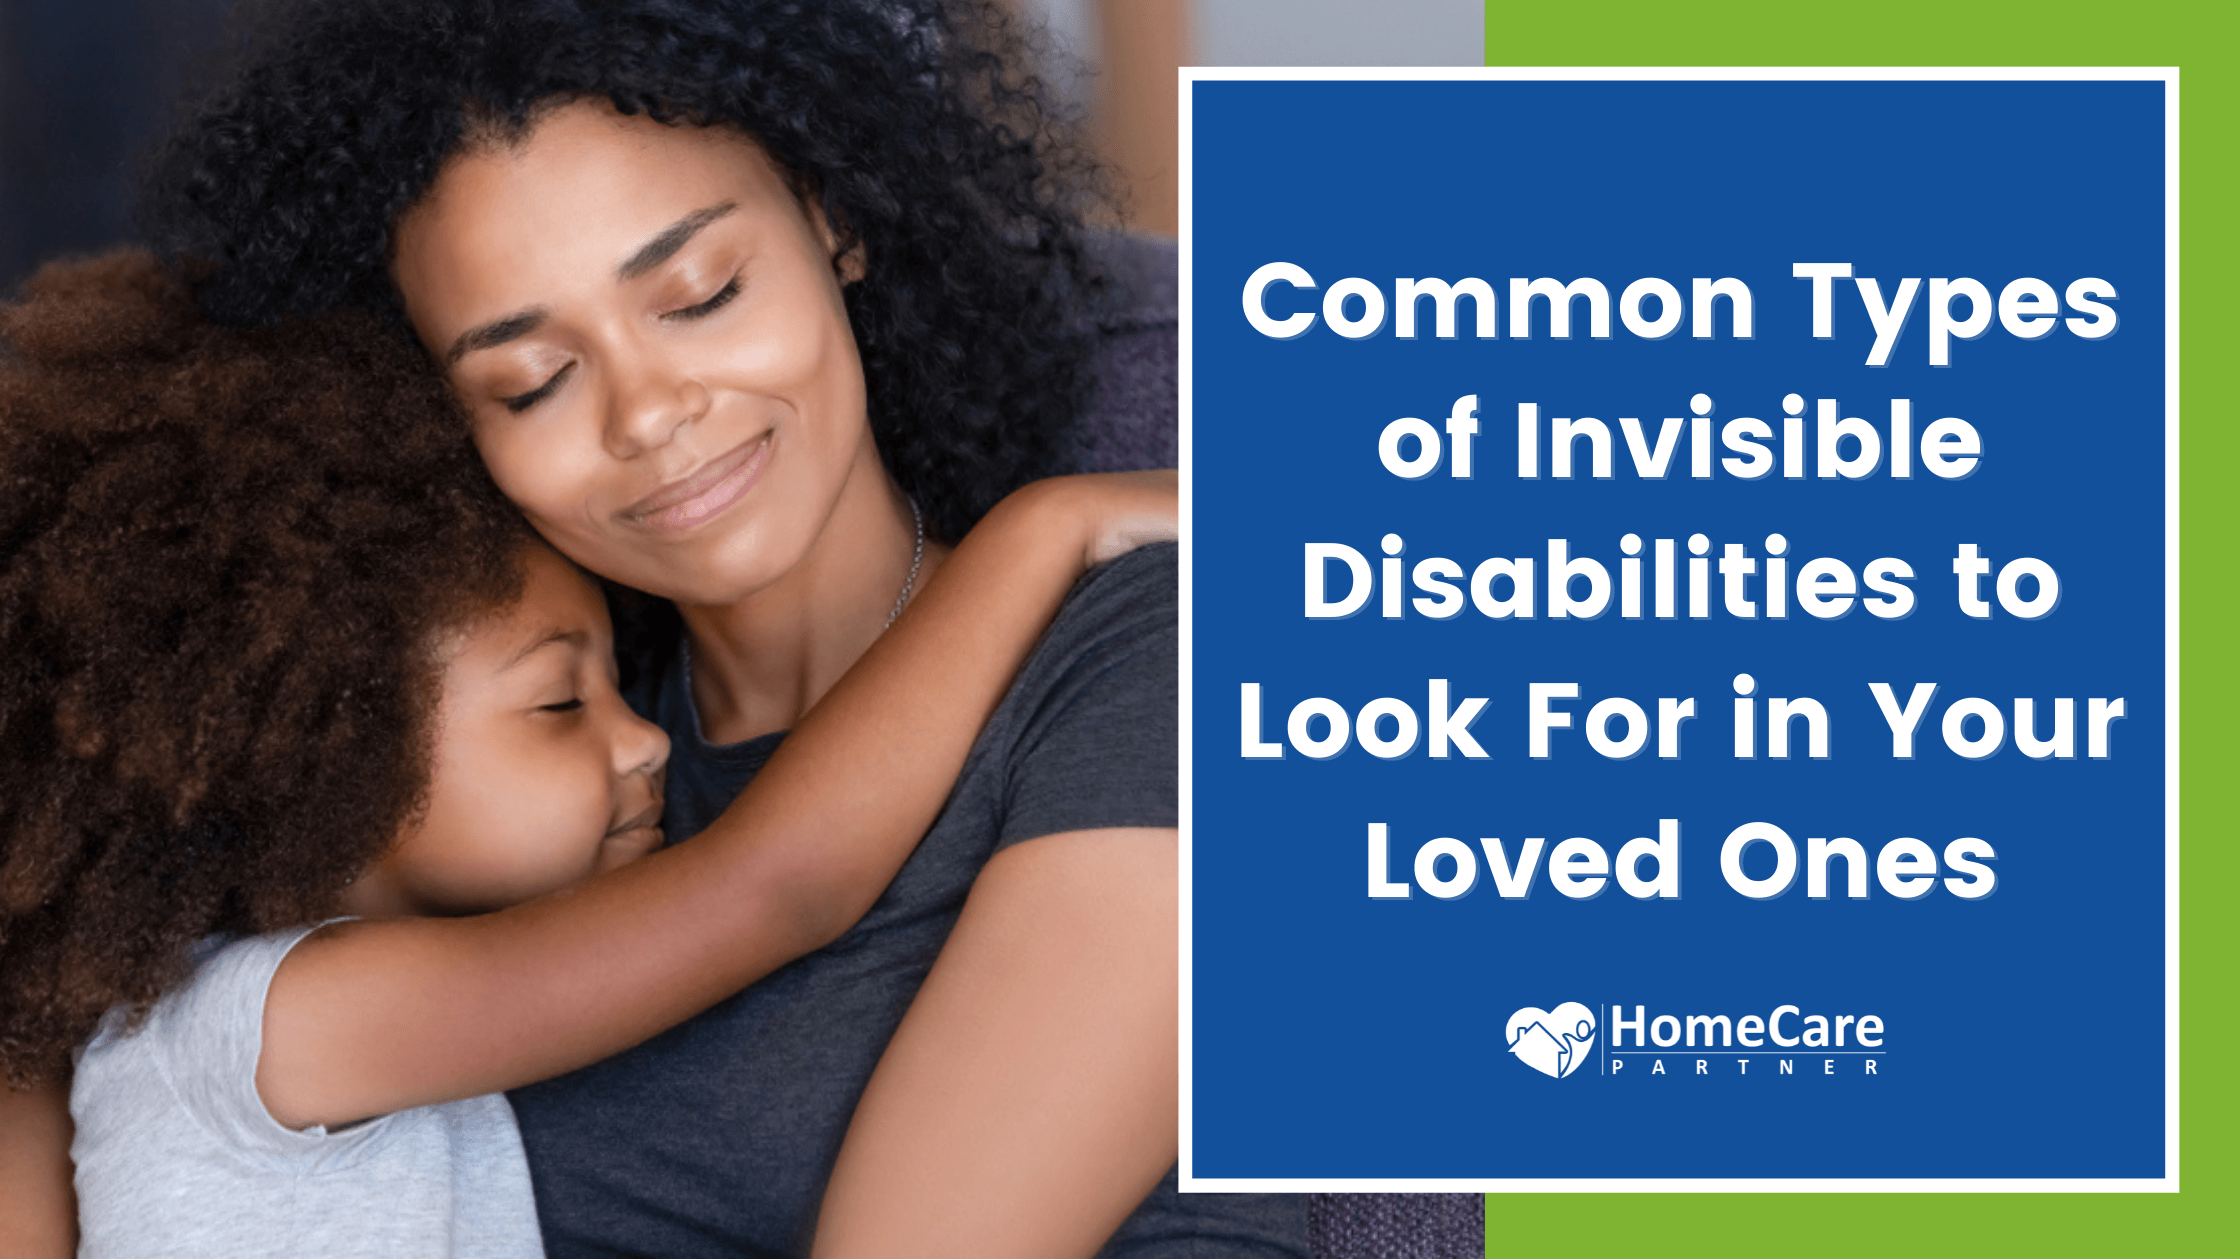 Common Types of Invisible Disabilities to Look For in Your Loved Ones